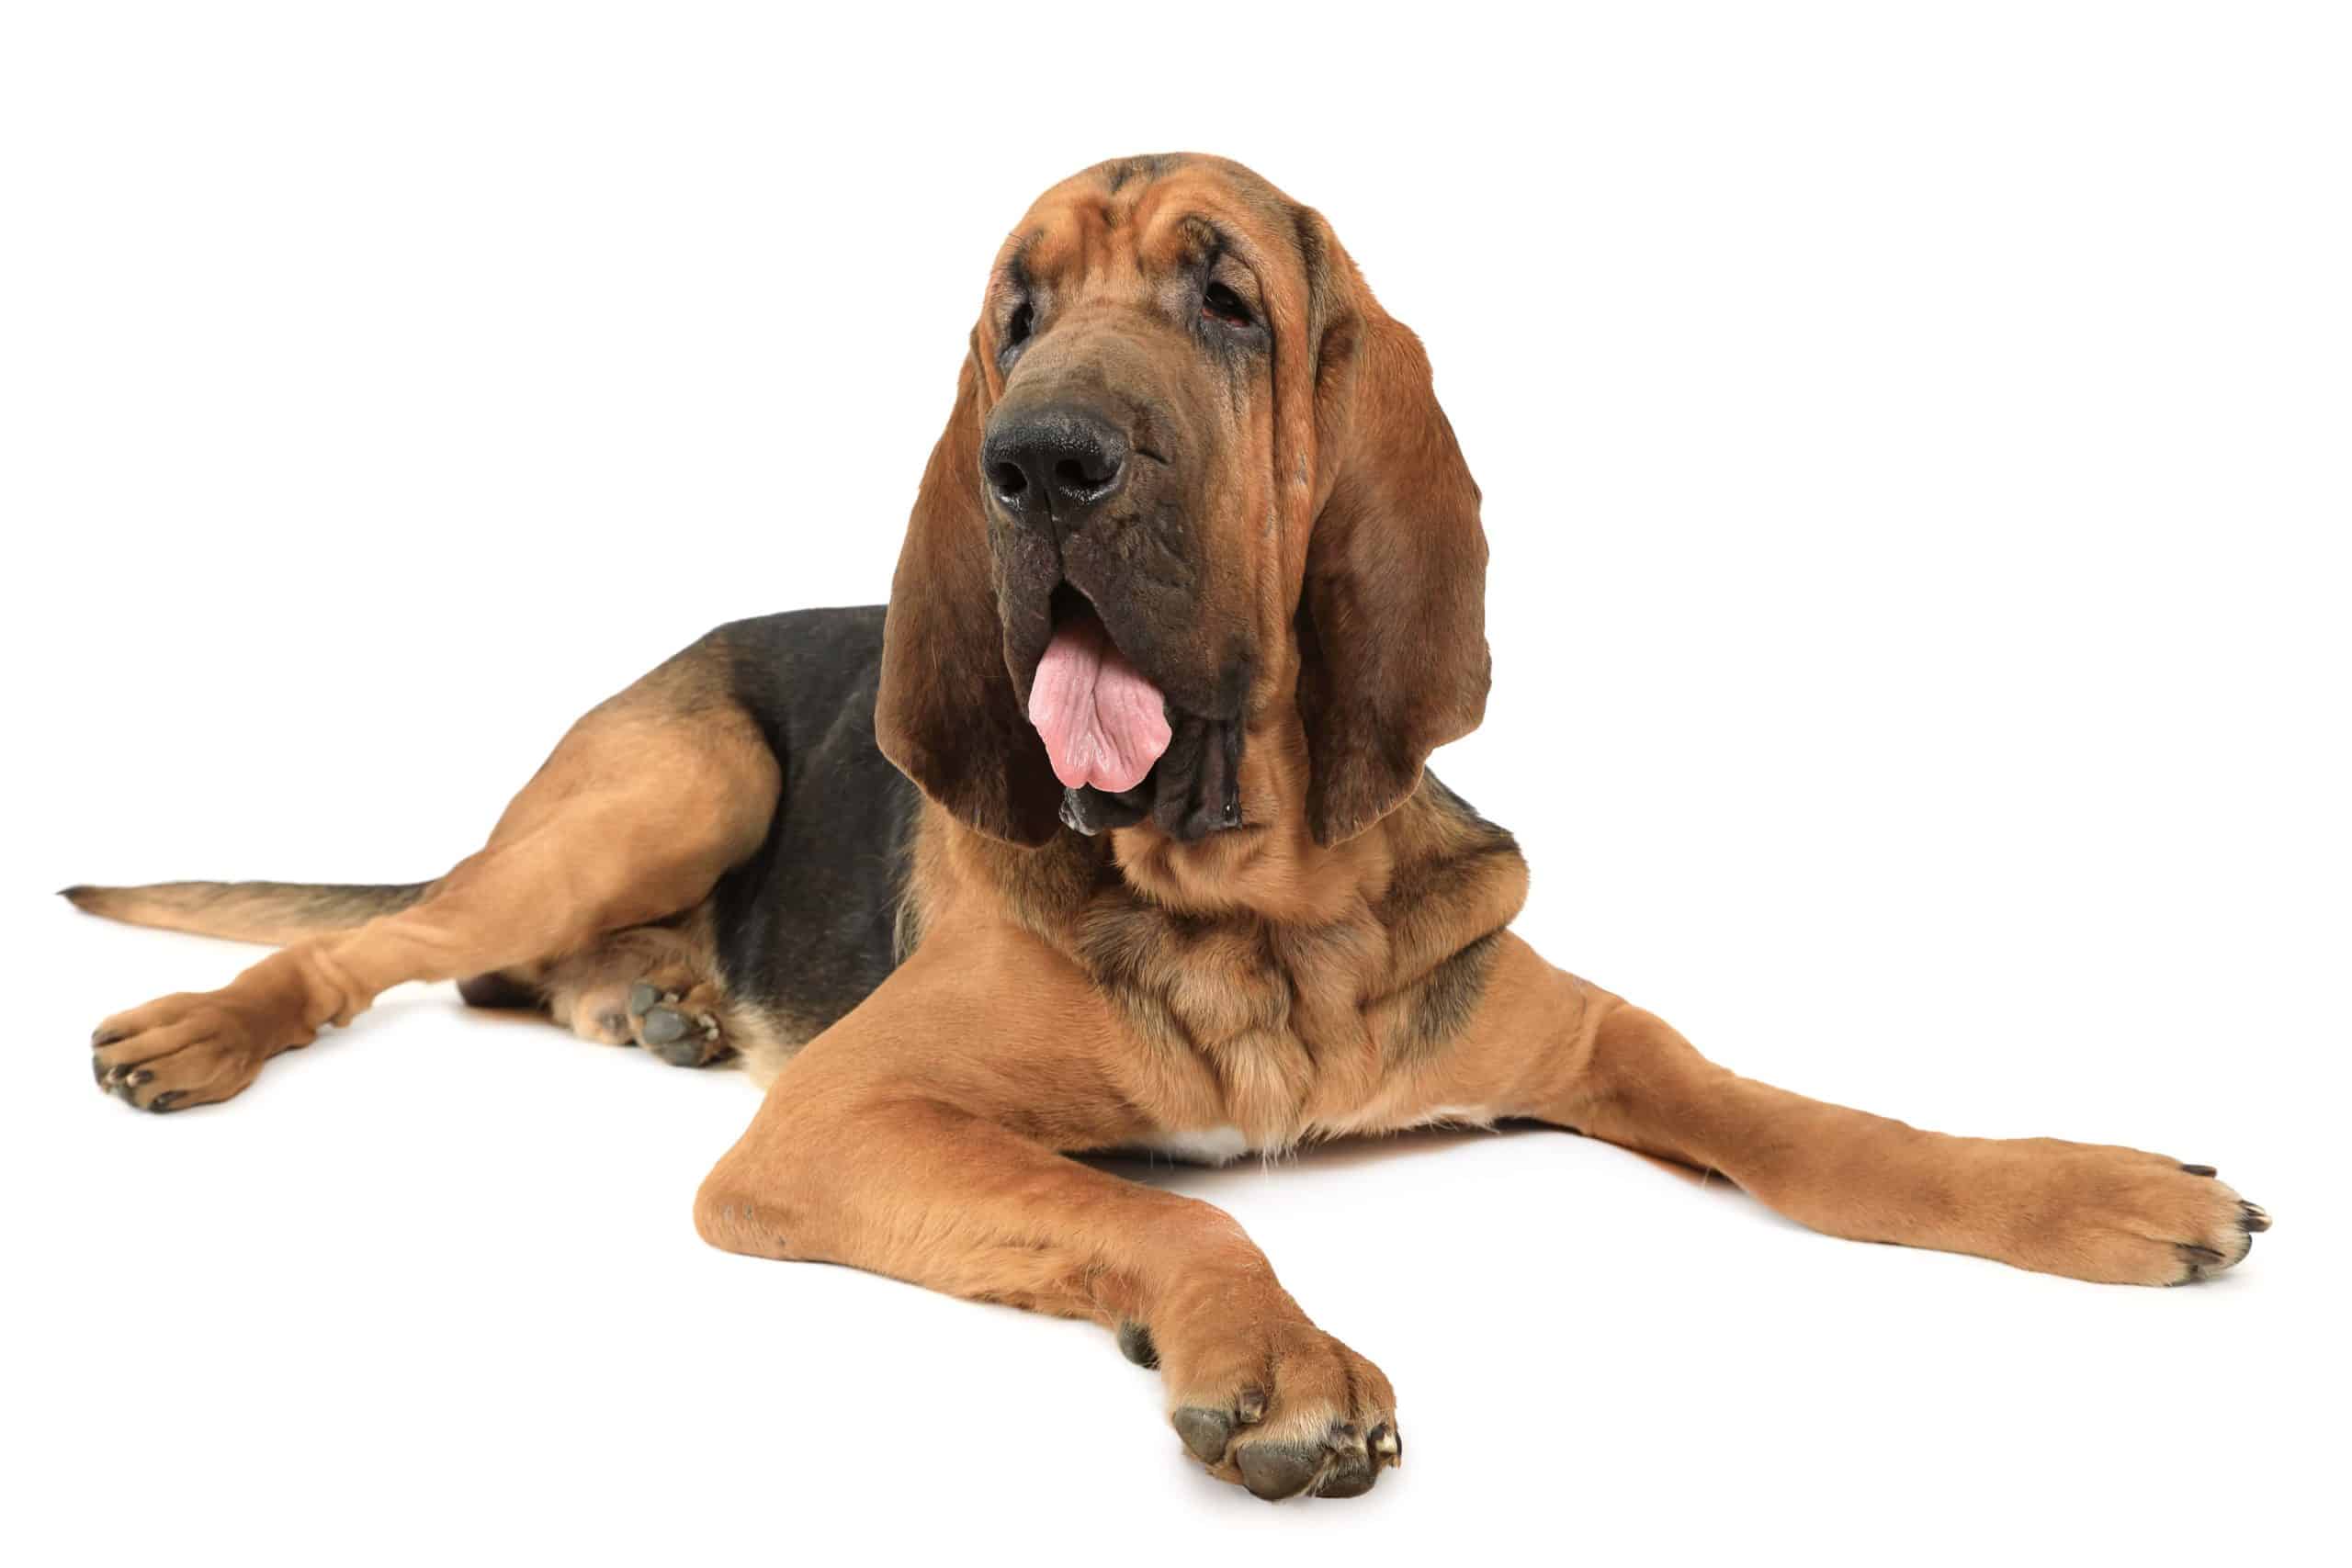 Bloodhound relaxes on white background. Scenthounds, like the bloodhound, are active, energetic dogs that need plenty of exercise and mind stimulating games. They make excellent candidates for search and rescue and therapy work.